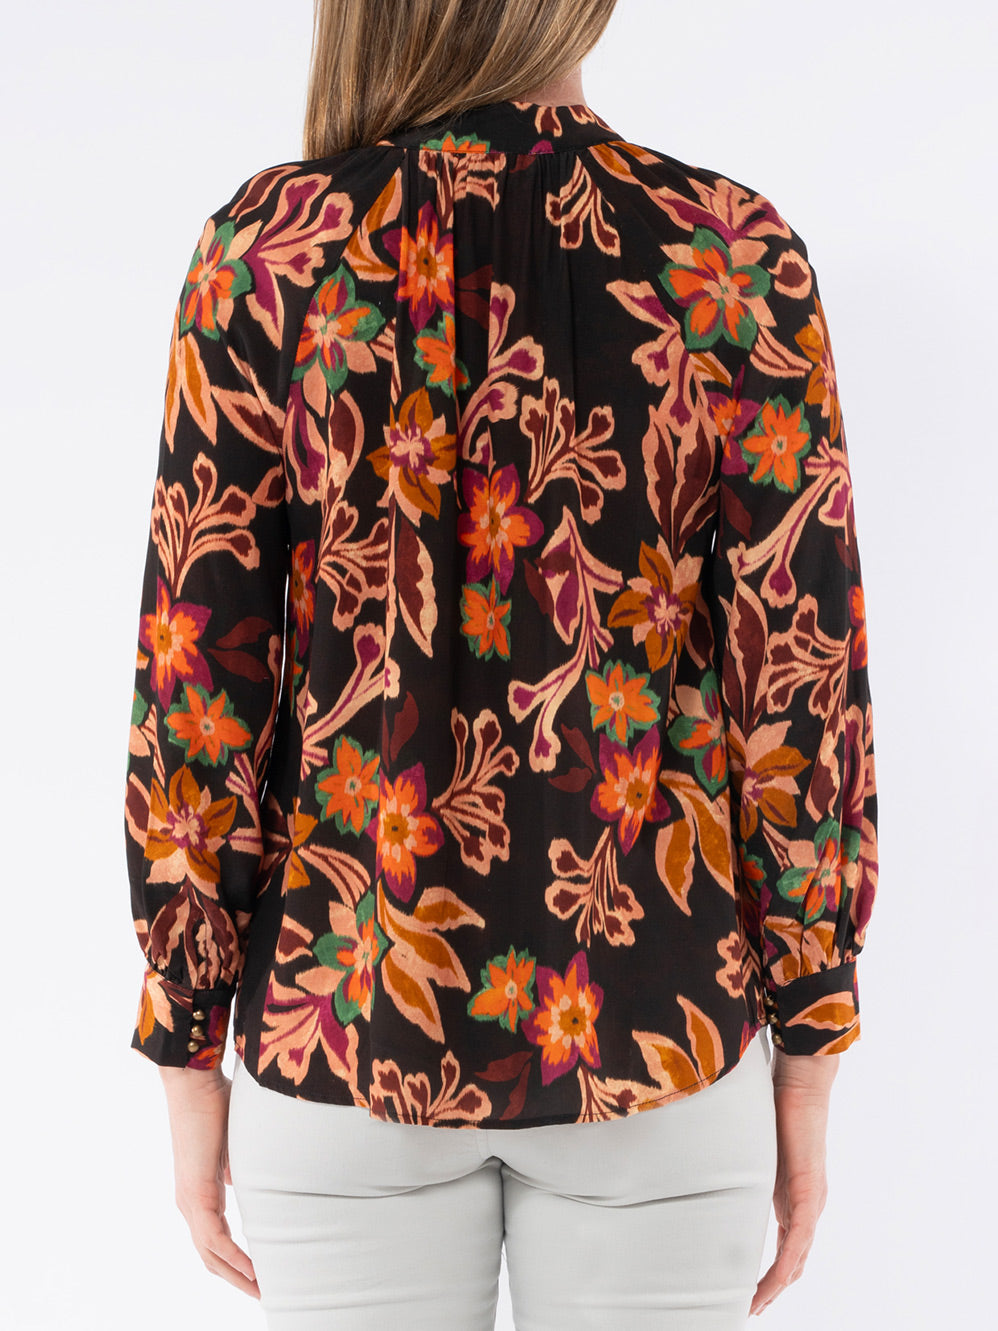 JUMP SPICE FLORAL TOP